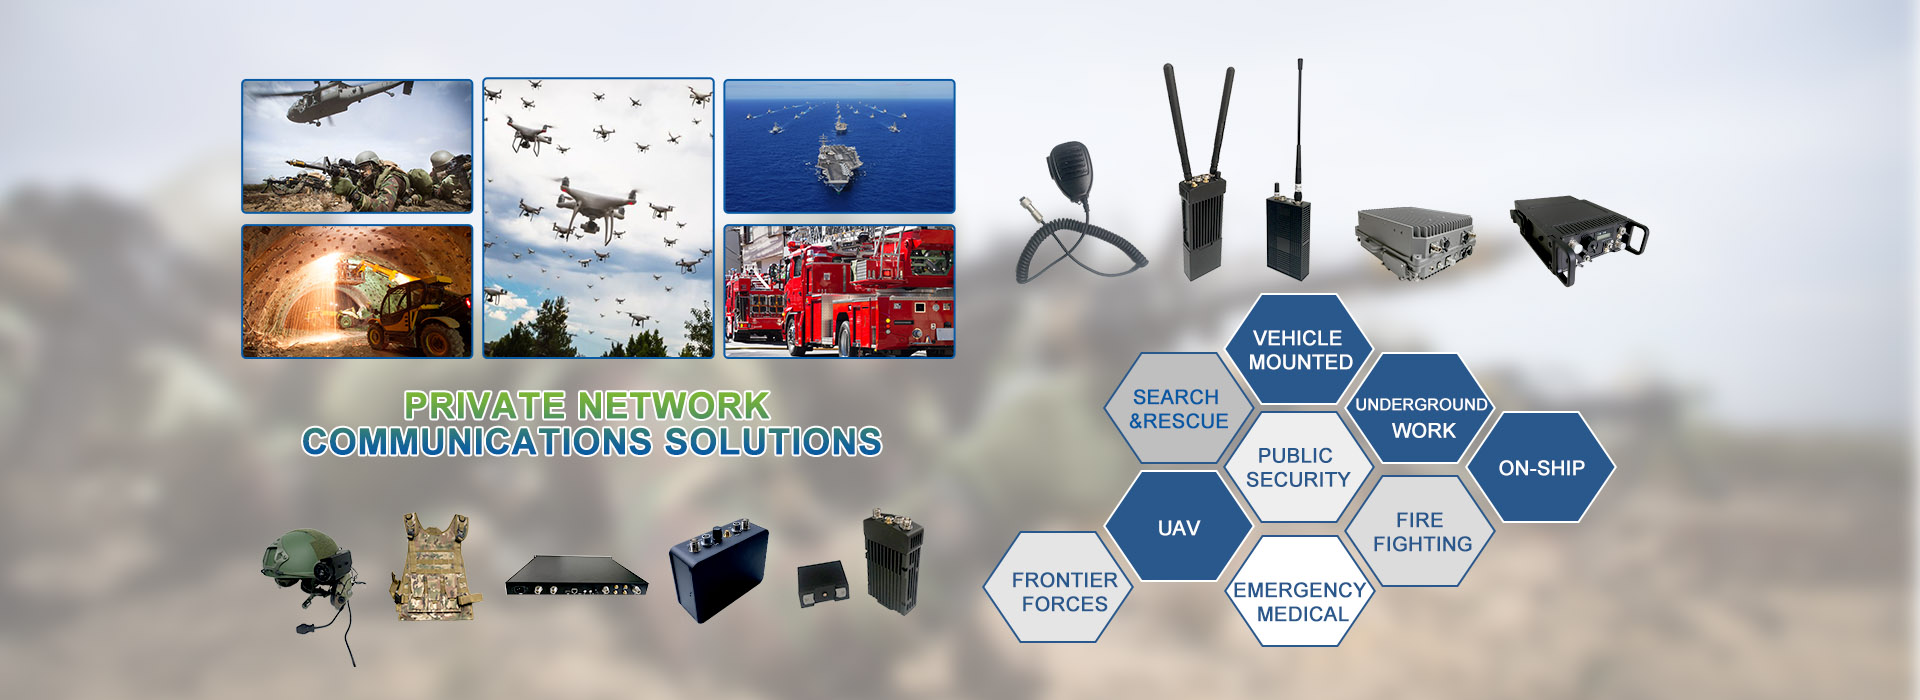 Private Network Communications Solutions